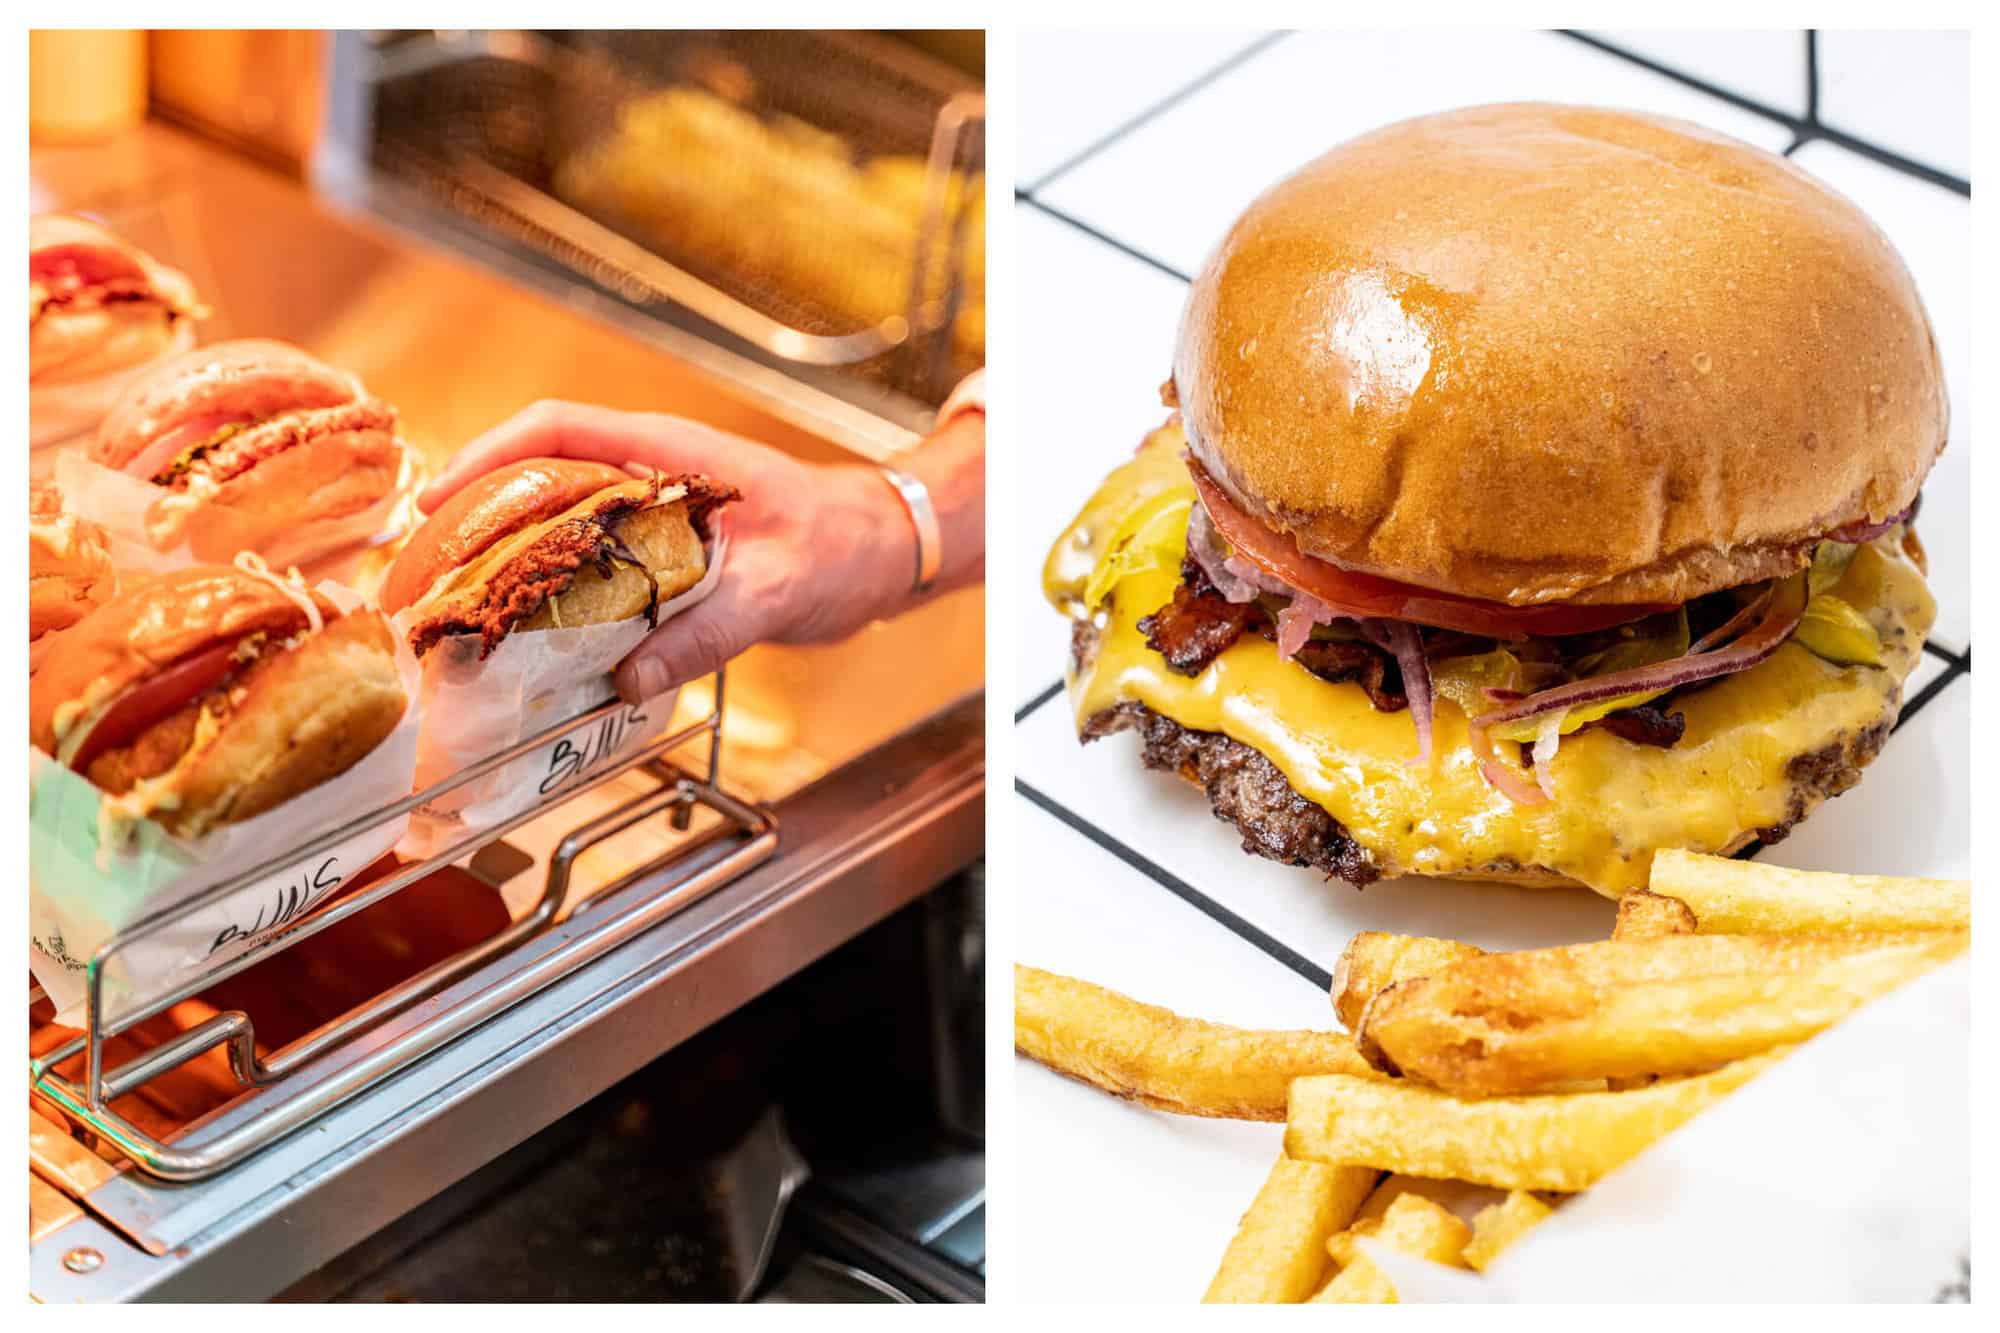 Left: a person taking a burger from a tray of burgers at the restaurant Buns Paris. Right: a burger and fries at Buns Paris.